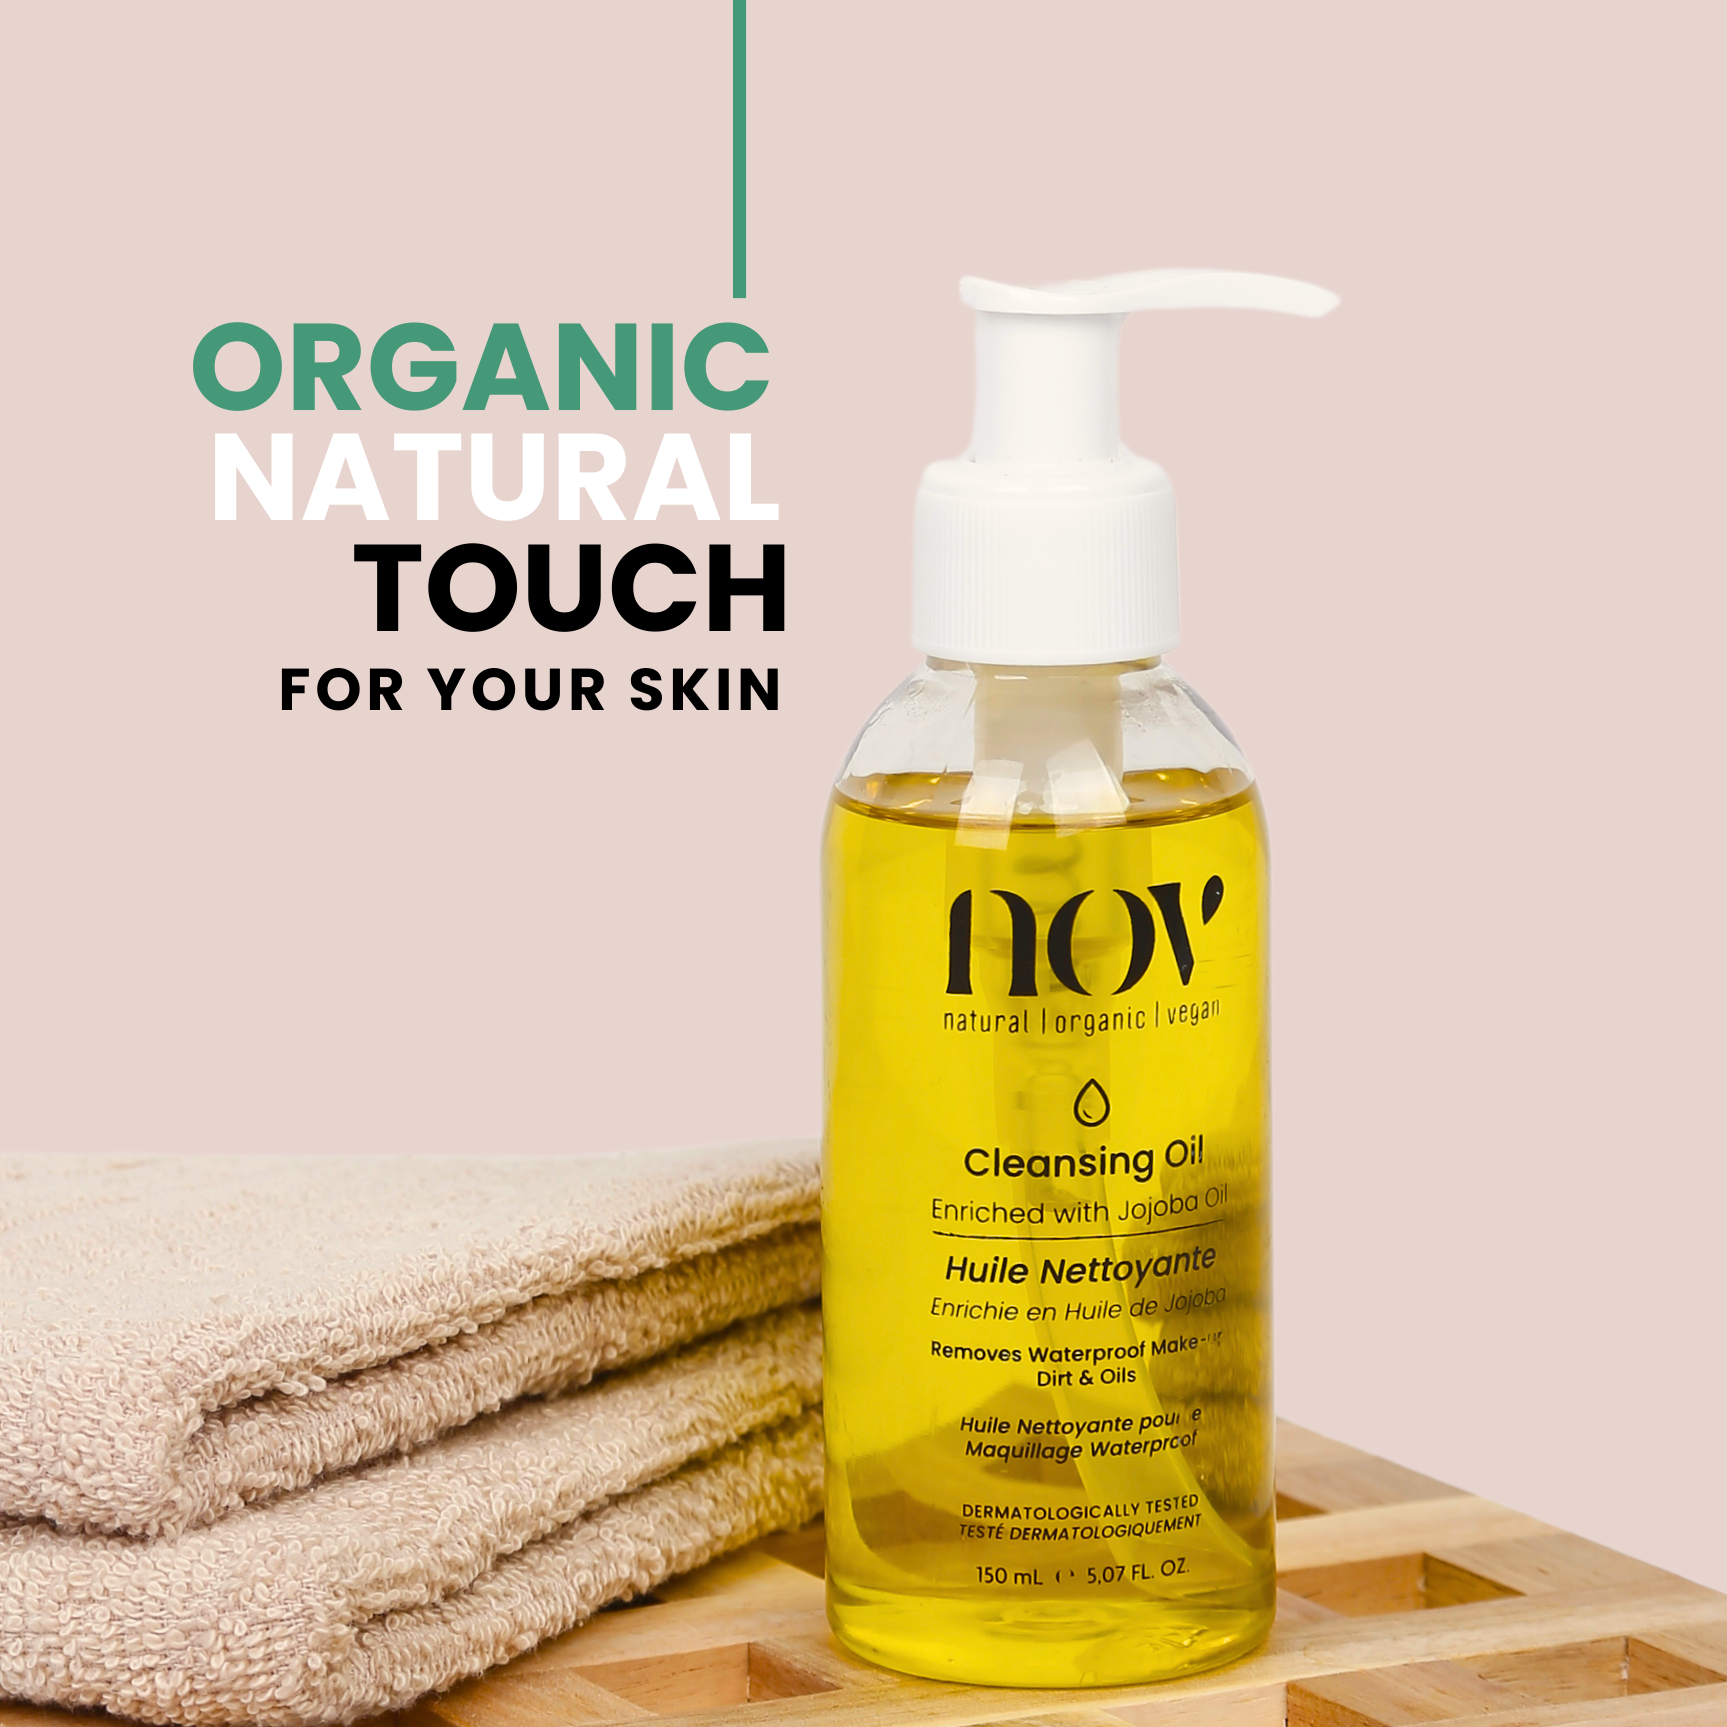 Pure Radiance Organic Toner & Cleansing Oil